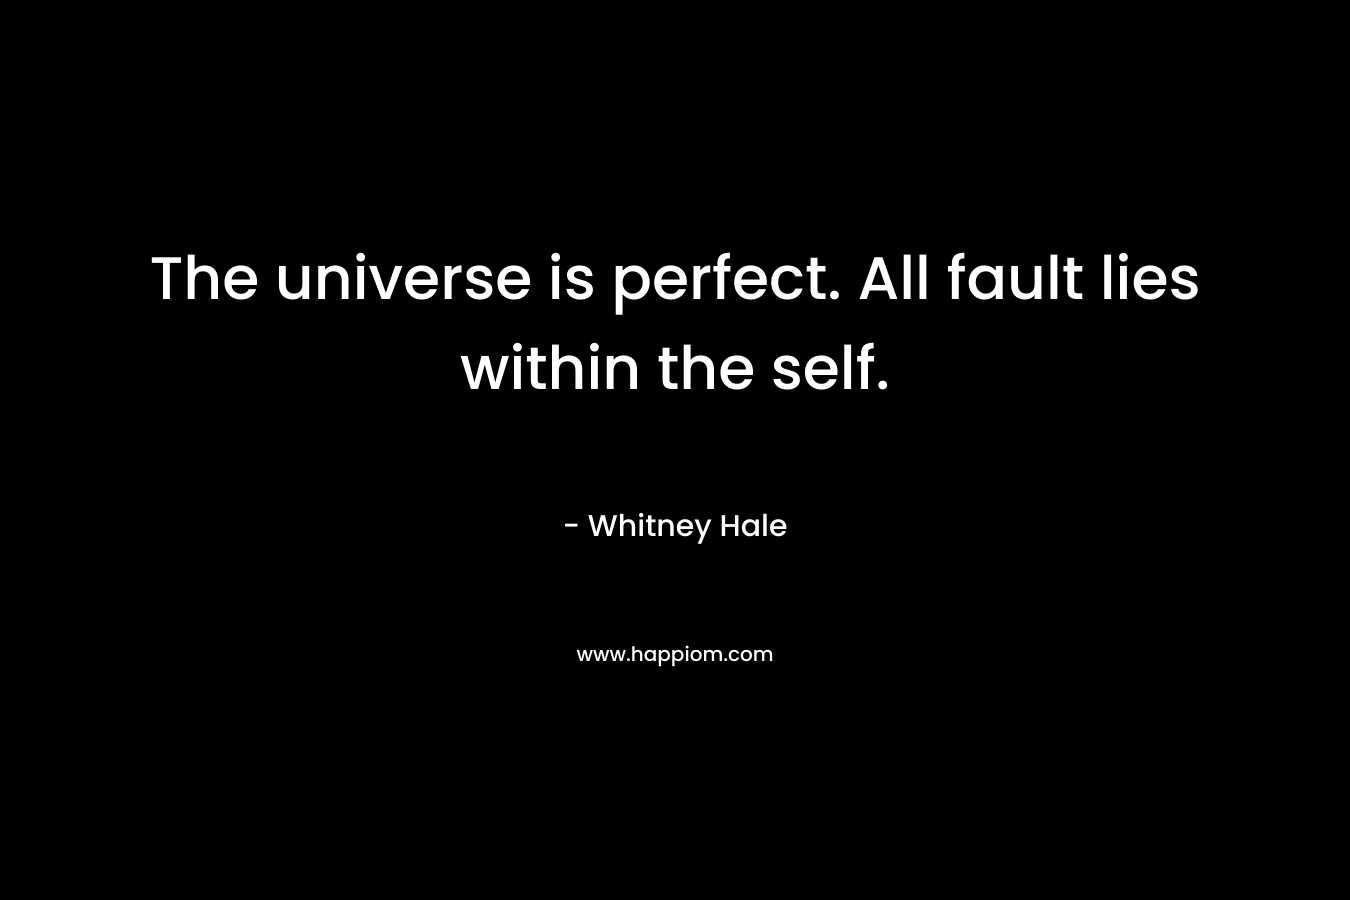 The universe is perfect. All fault lies within the self. – Whitney Hale